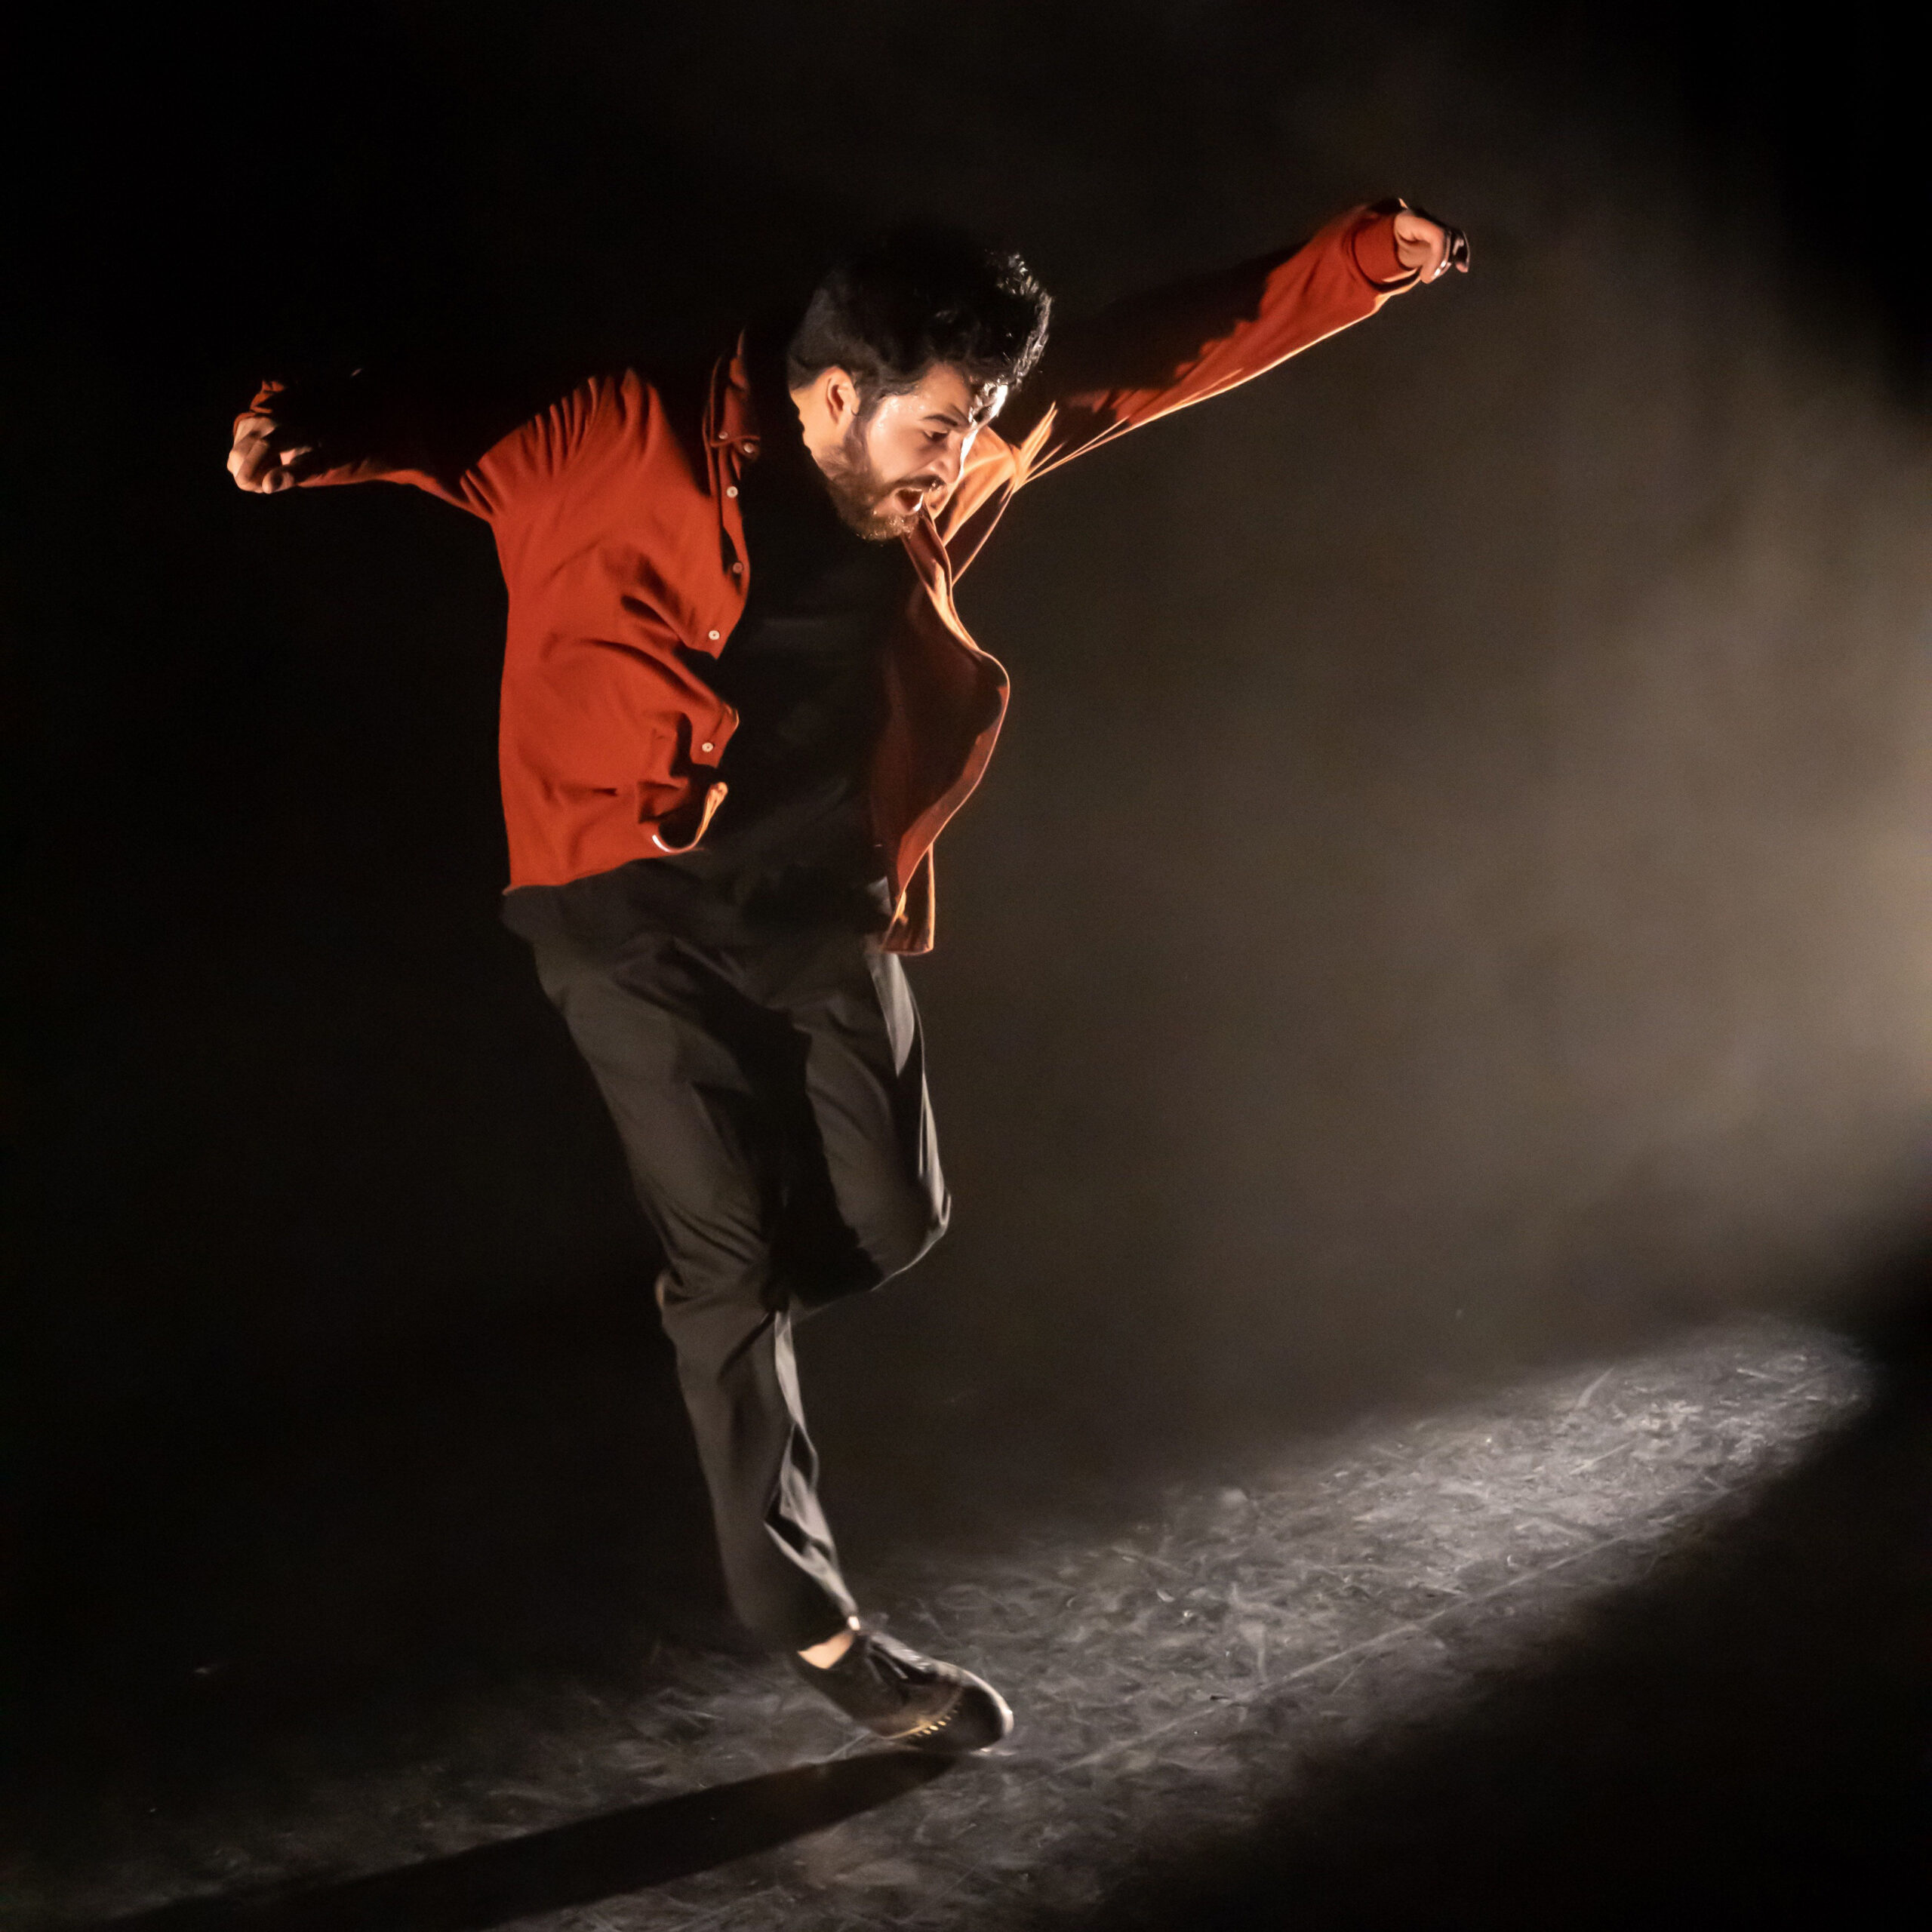 Johnny Morin is dancing in a red jack on a dark stage with a spotlight further away shining on his tap shoes. He holds his arms out from his sides while only the tip of one tap shoe is grazing across the floor.